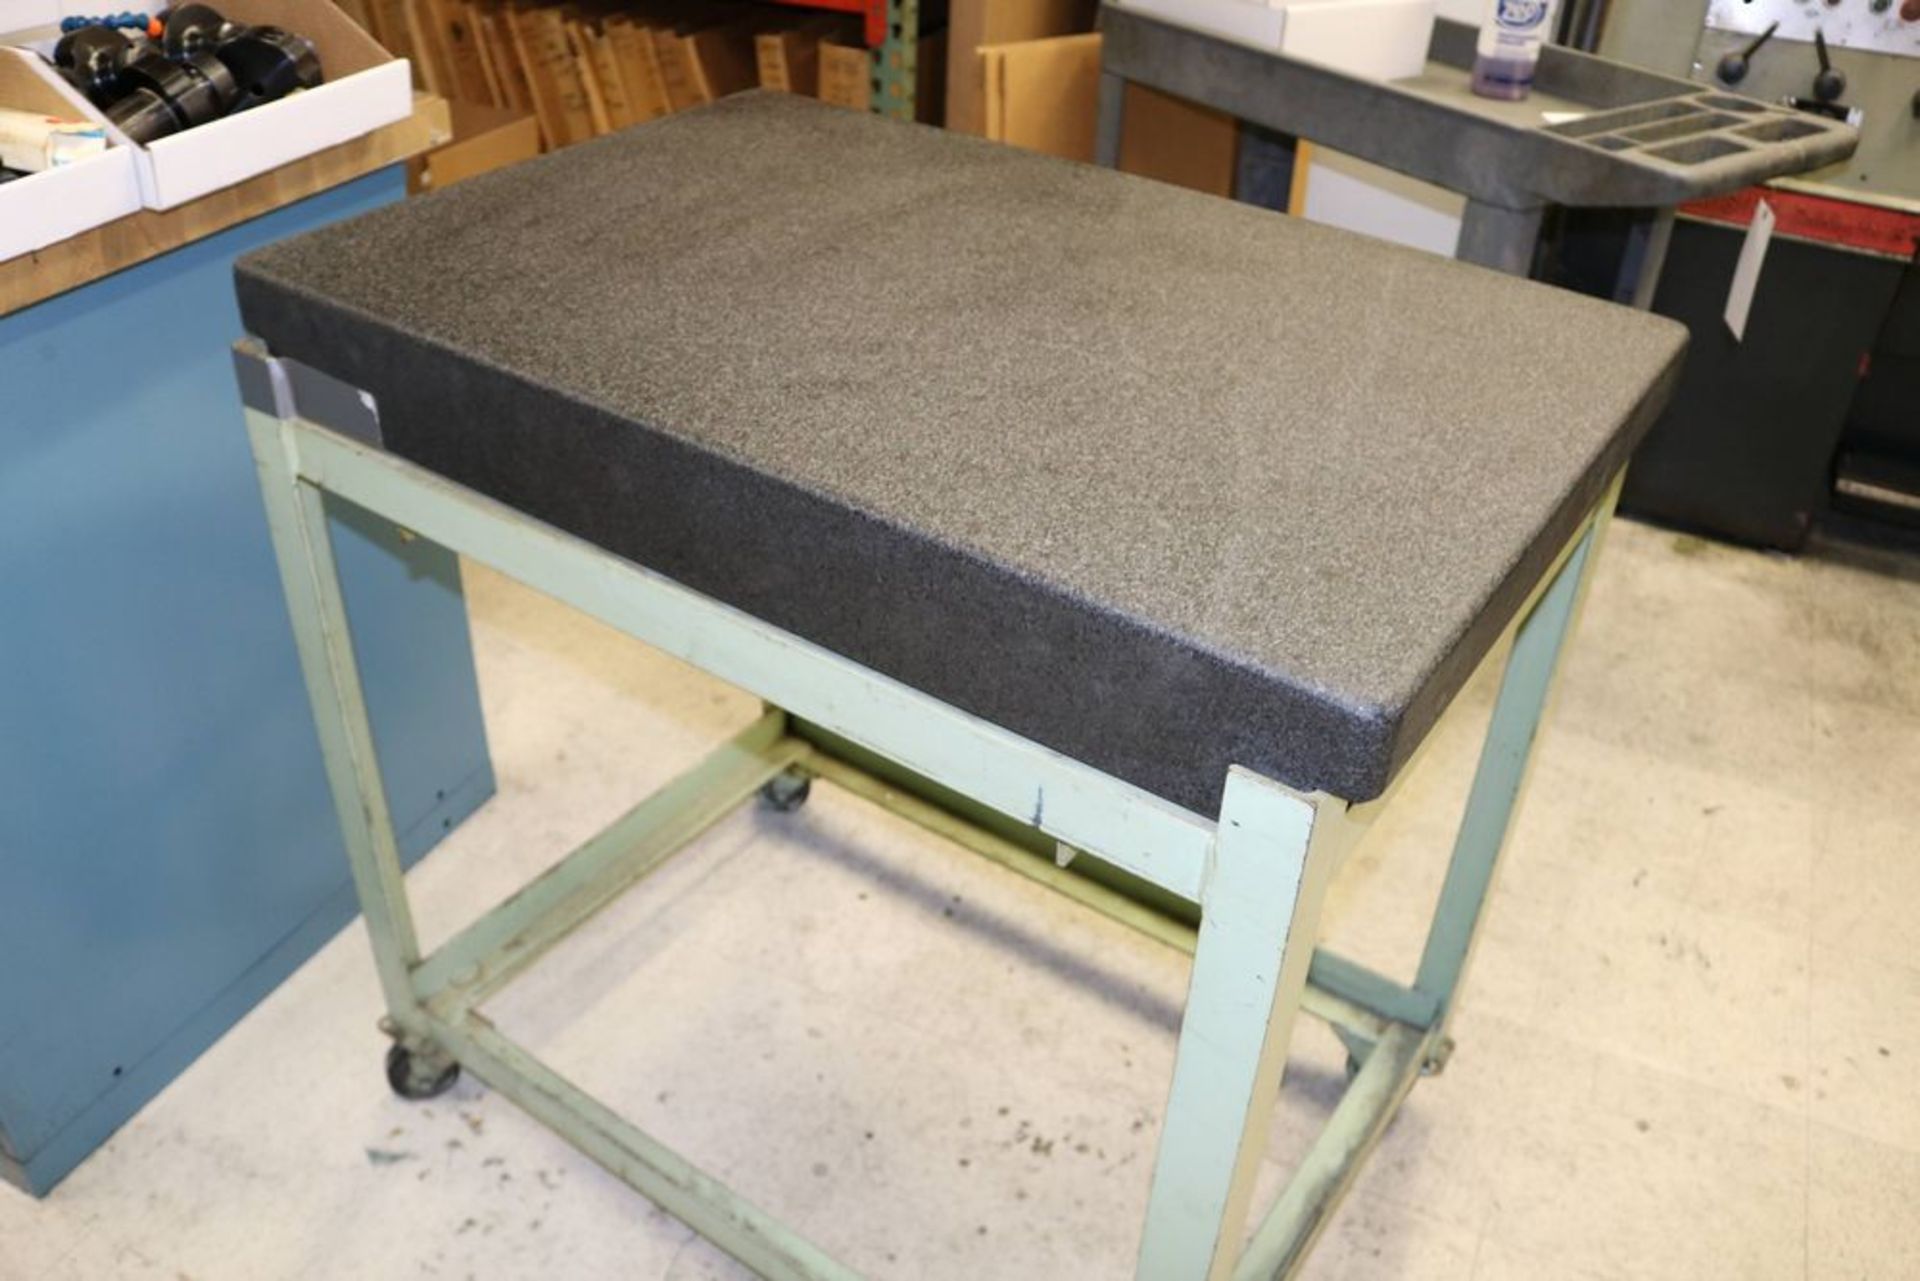 Standridge Black Granite Surface Inspection Plate with Stand 24" x 36" x 4" - Image 2 of 4